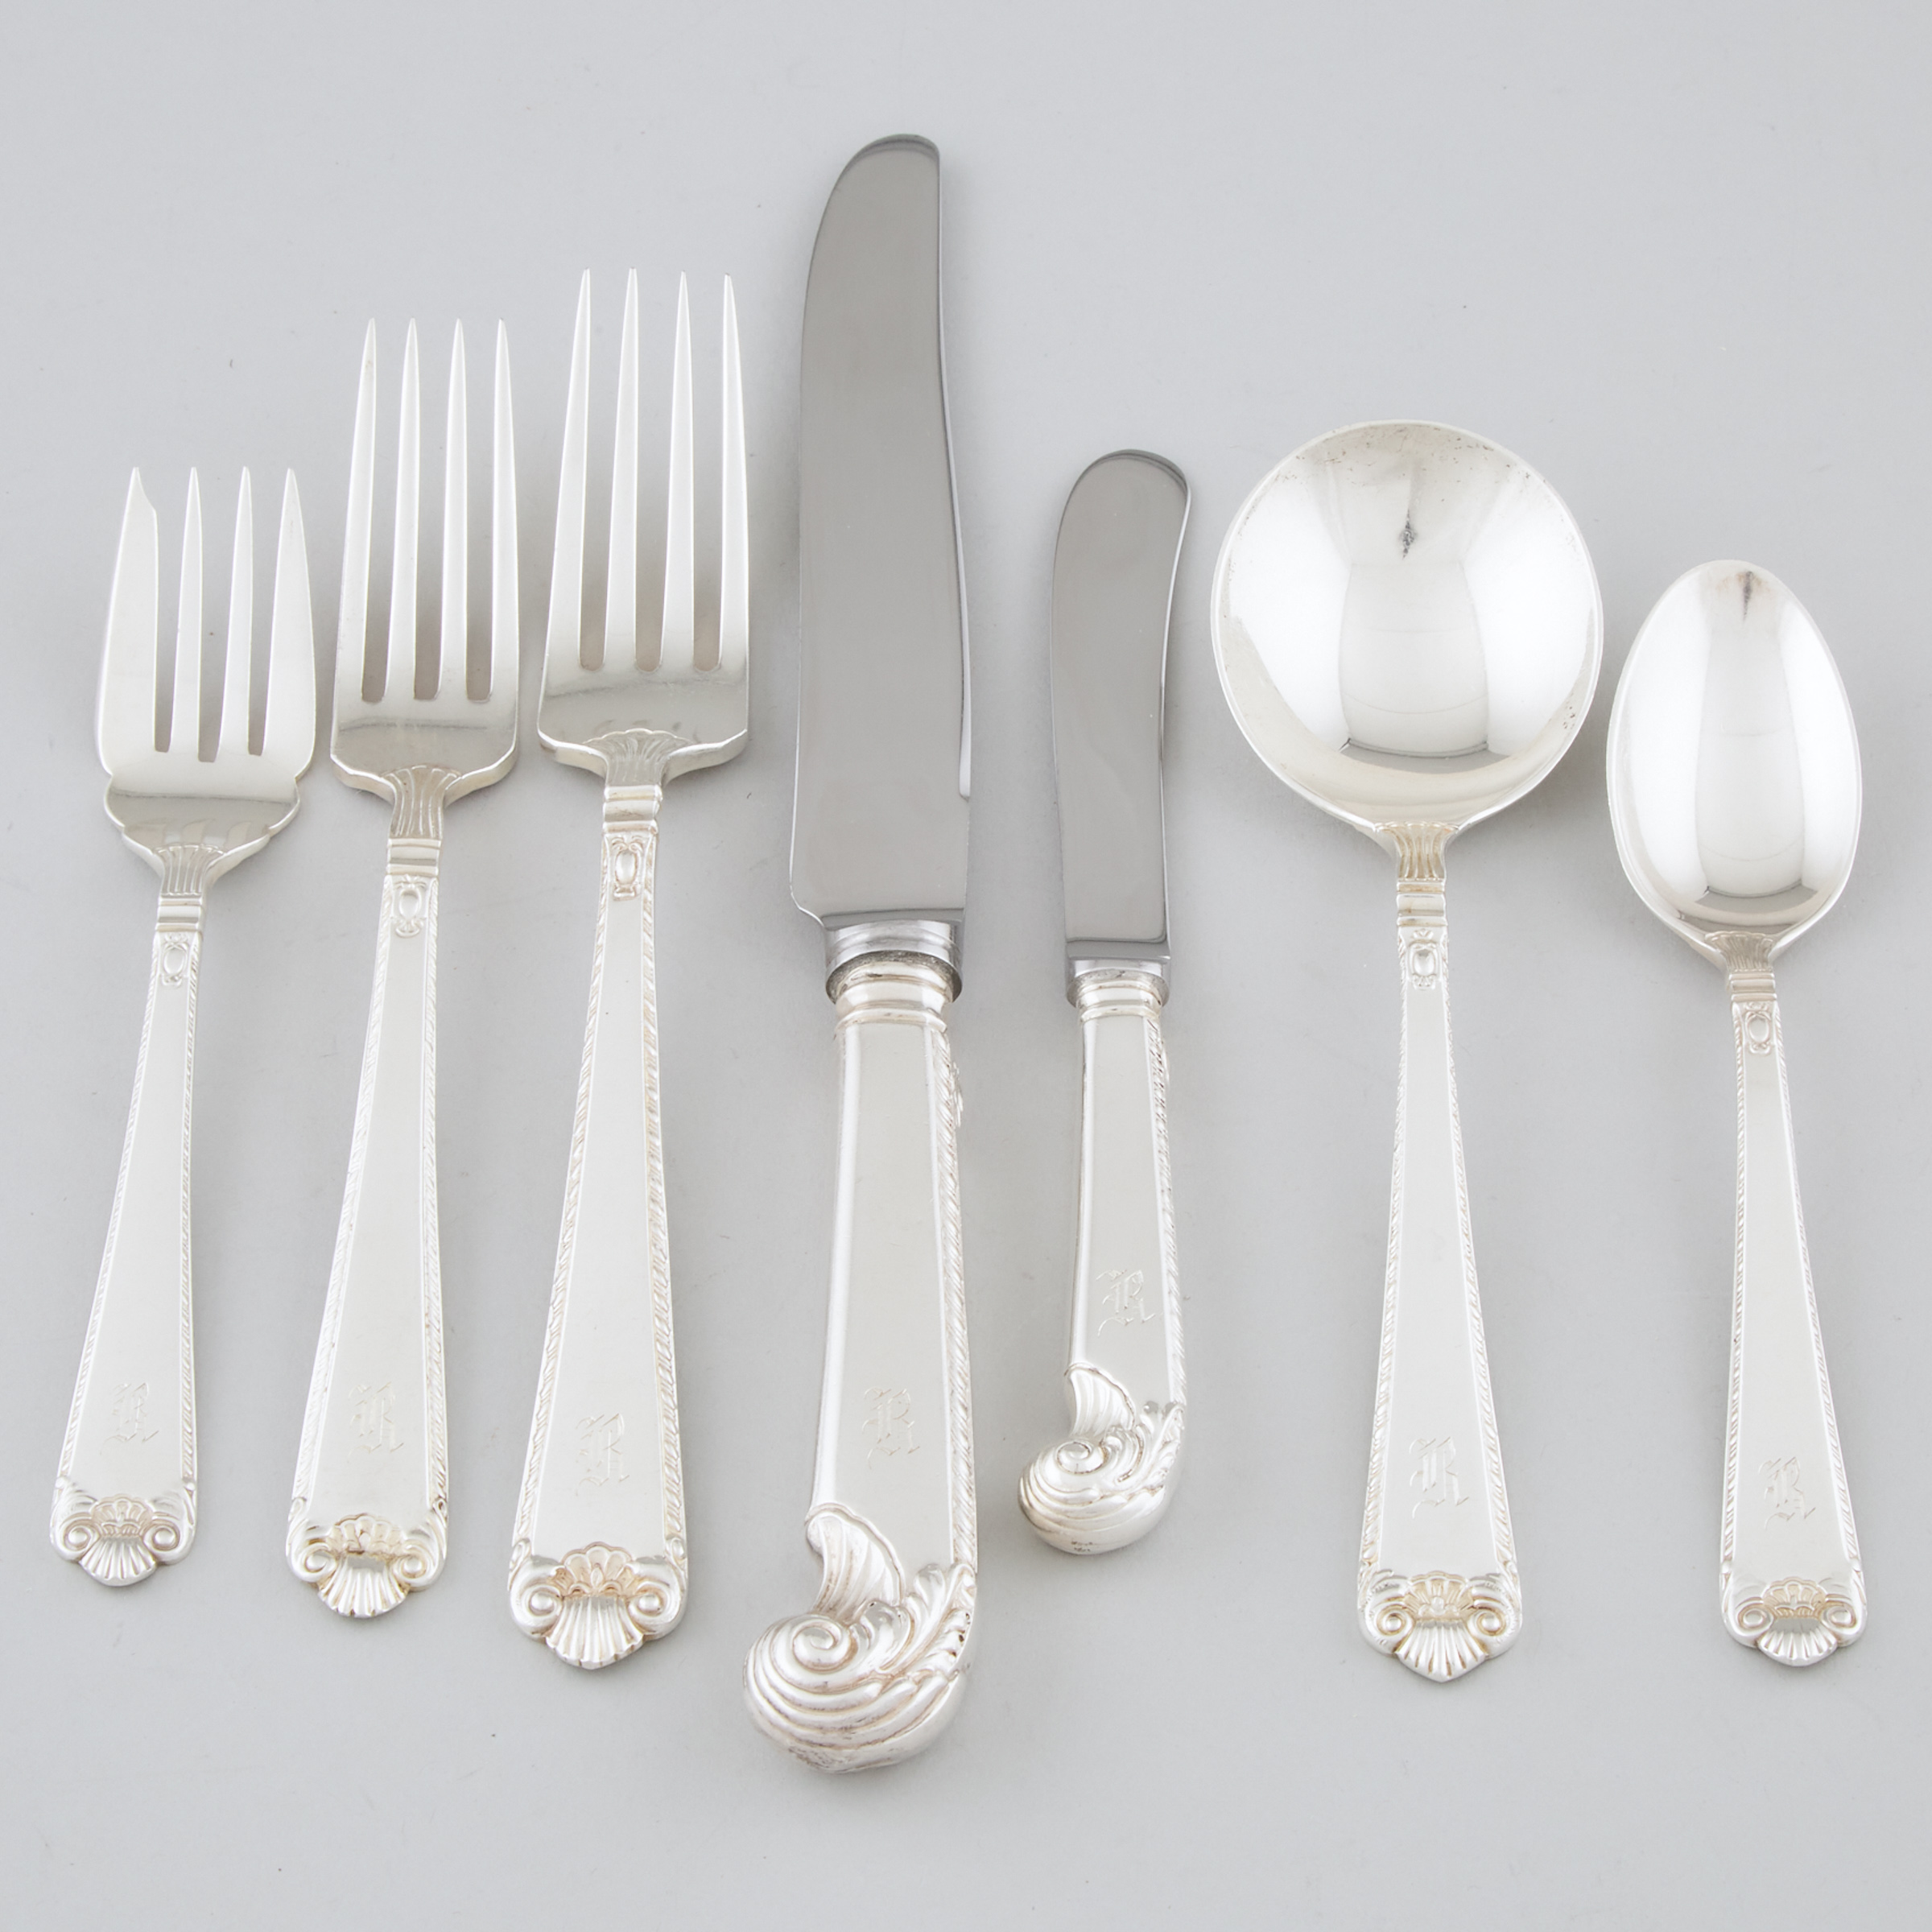 Canadian Silver 'George II Plain' Pattern Flatware Service, Henry Birks & Sons, Montreal Que., 20th century